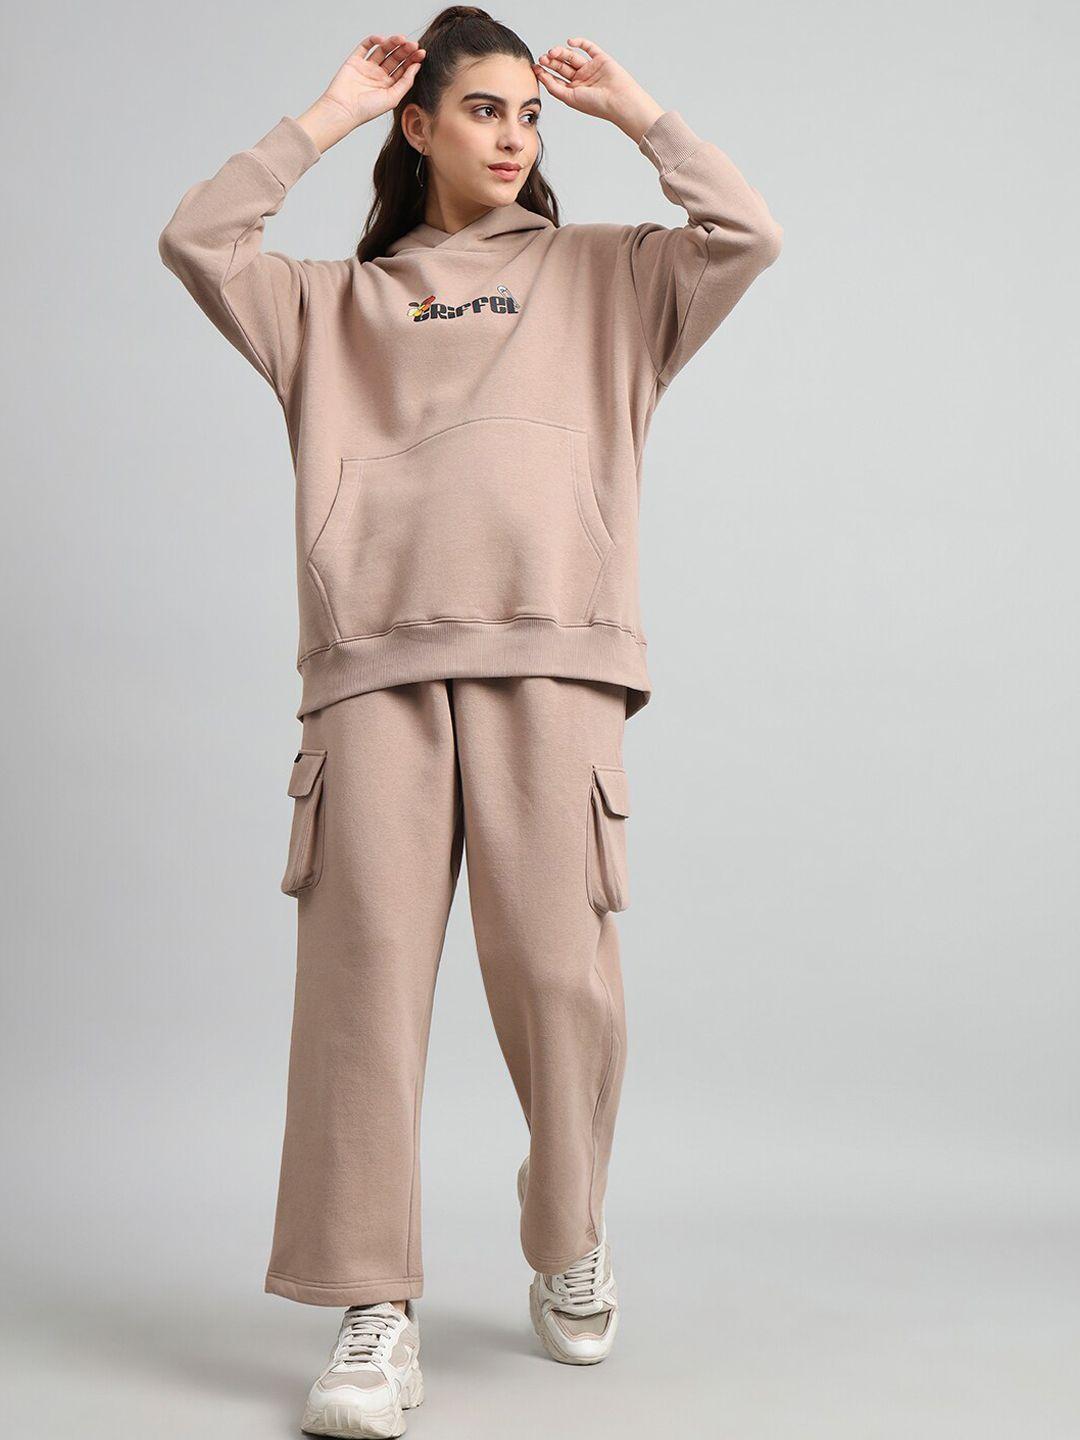 griffel typography printed hooded fleece cotton tracksuit